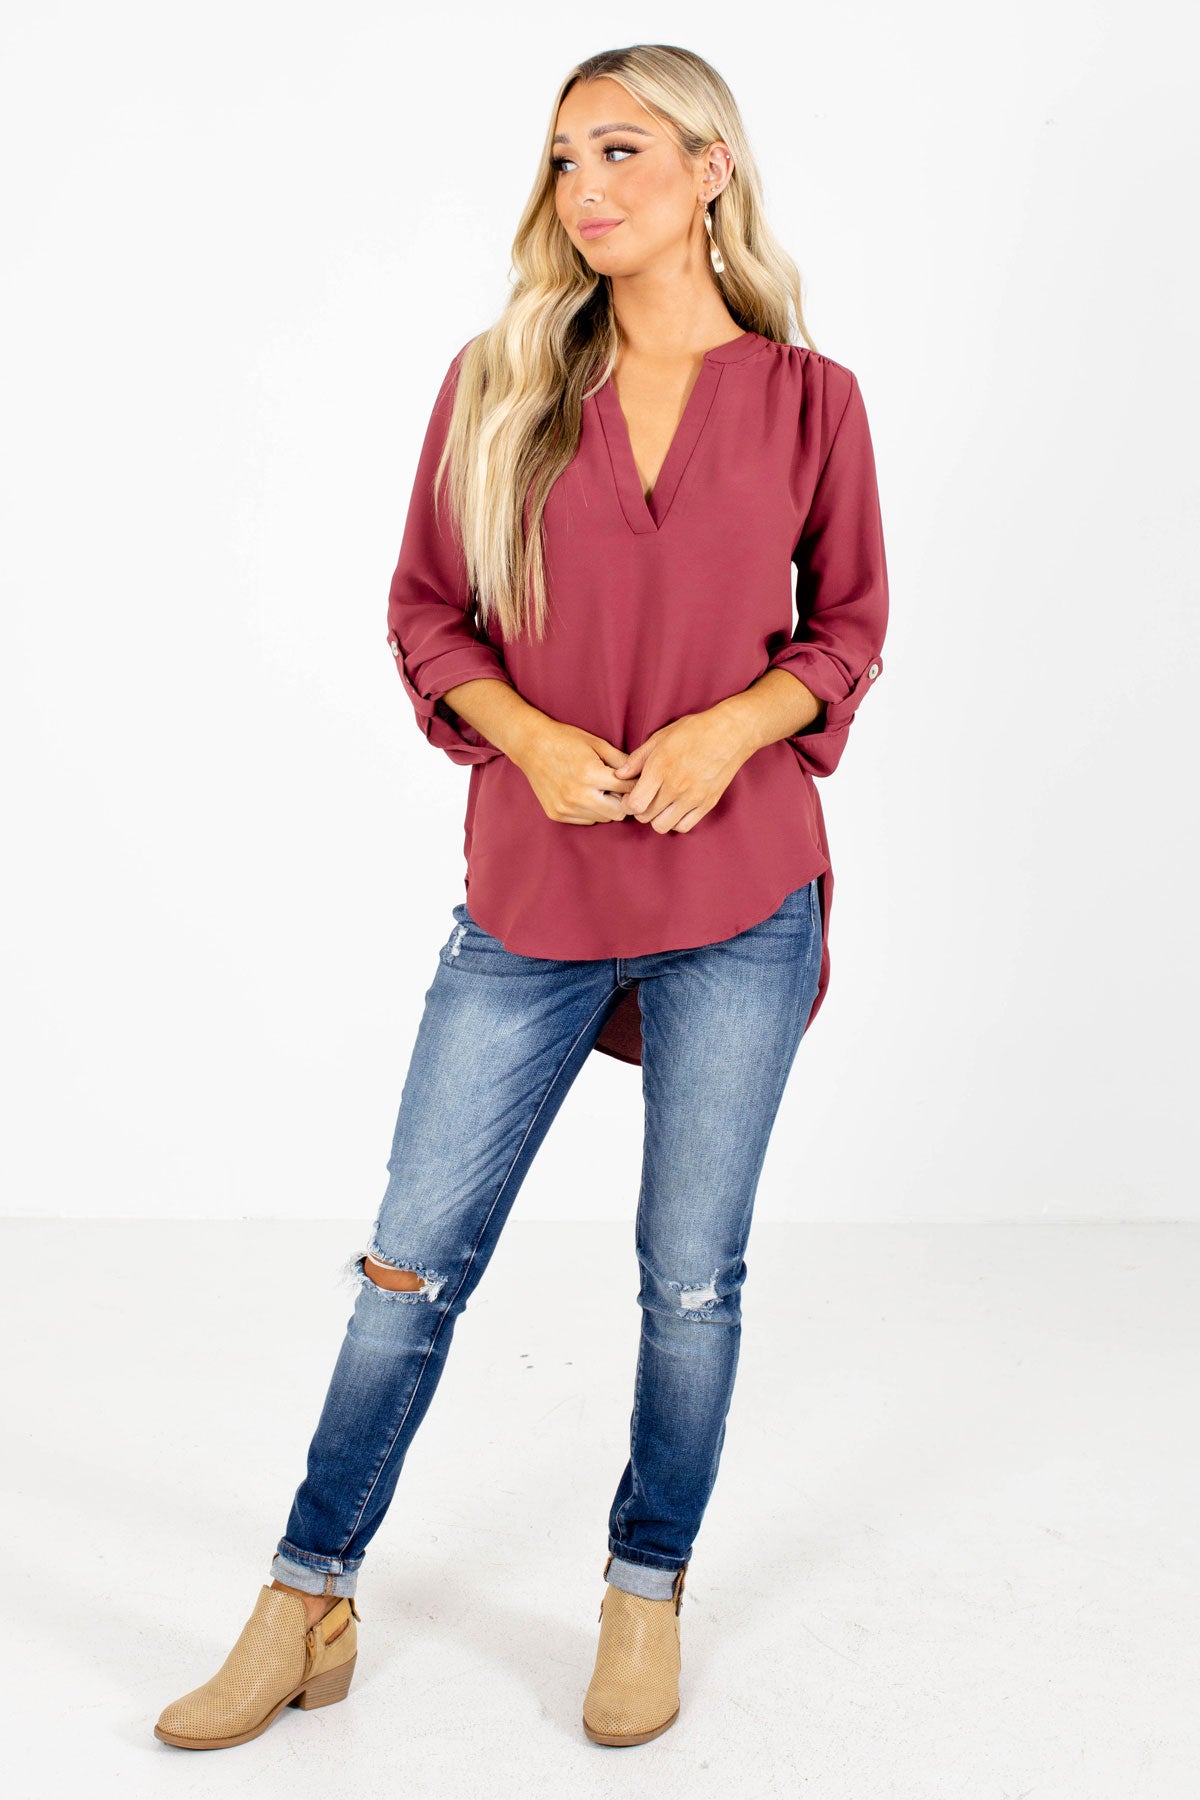 Red Blouse Women Boutique Clothing